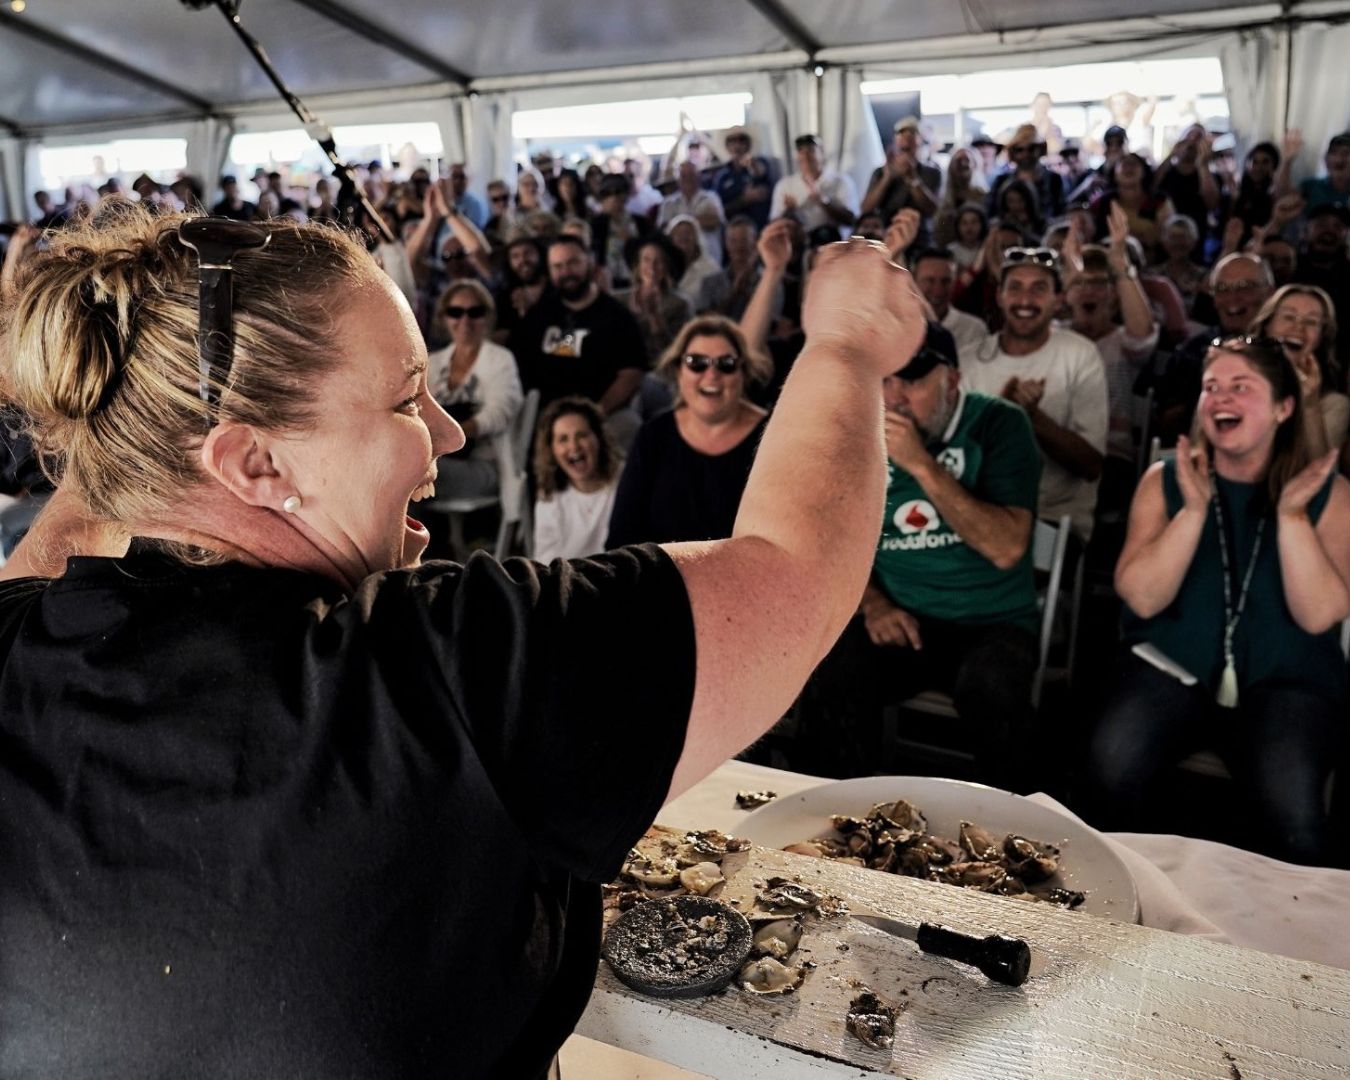 Champion Oyster Shucker Sally McLean celebrates her win in 2021